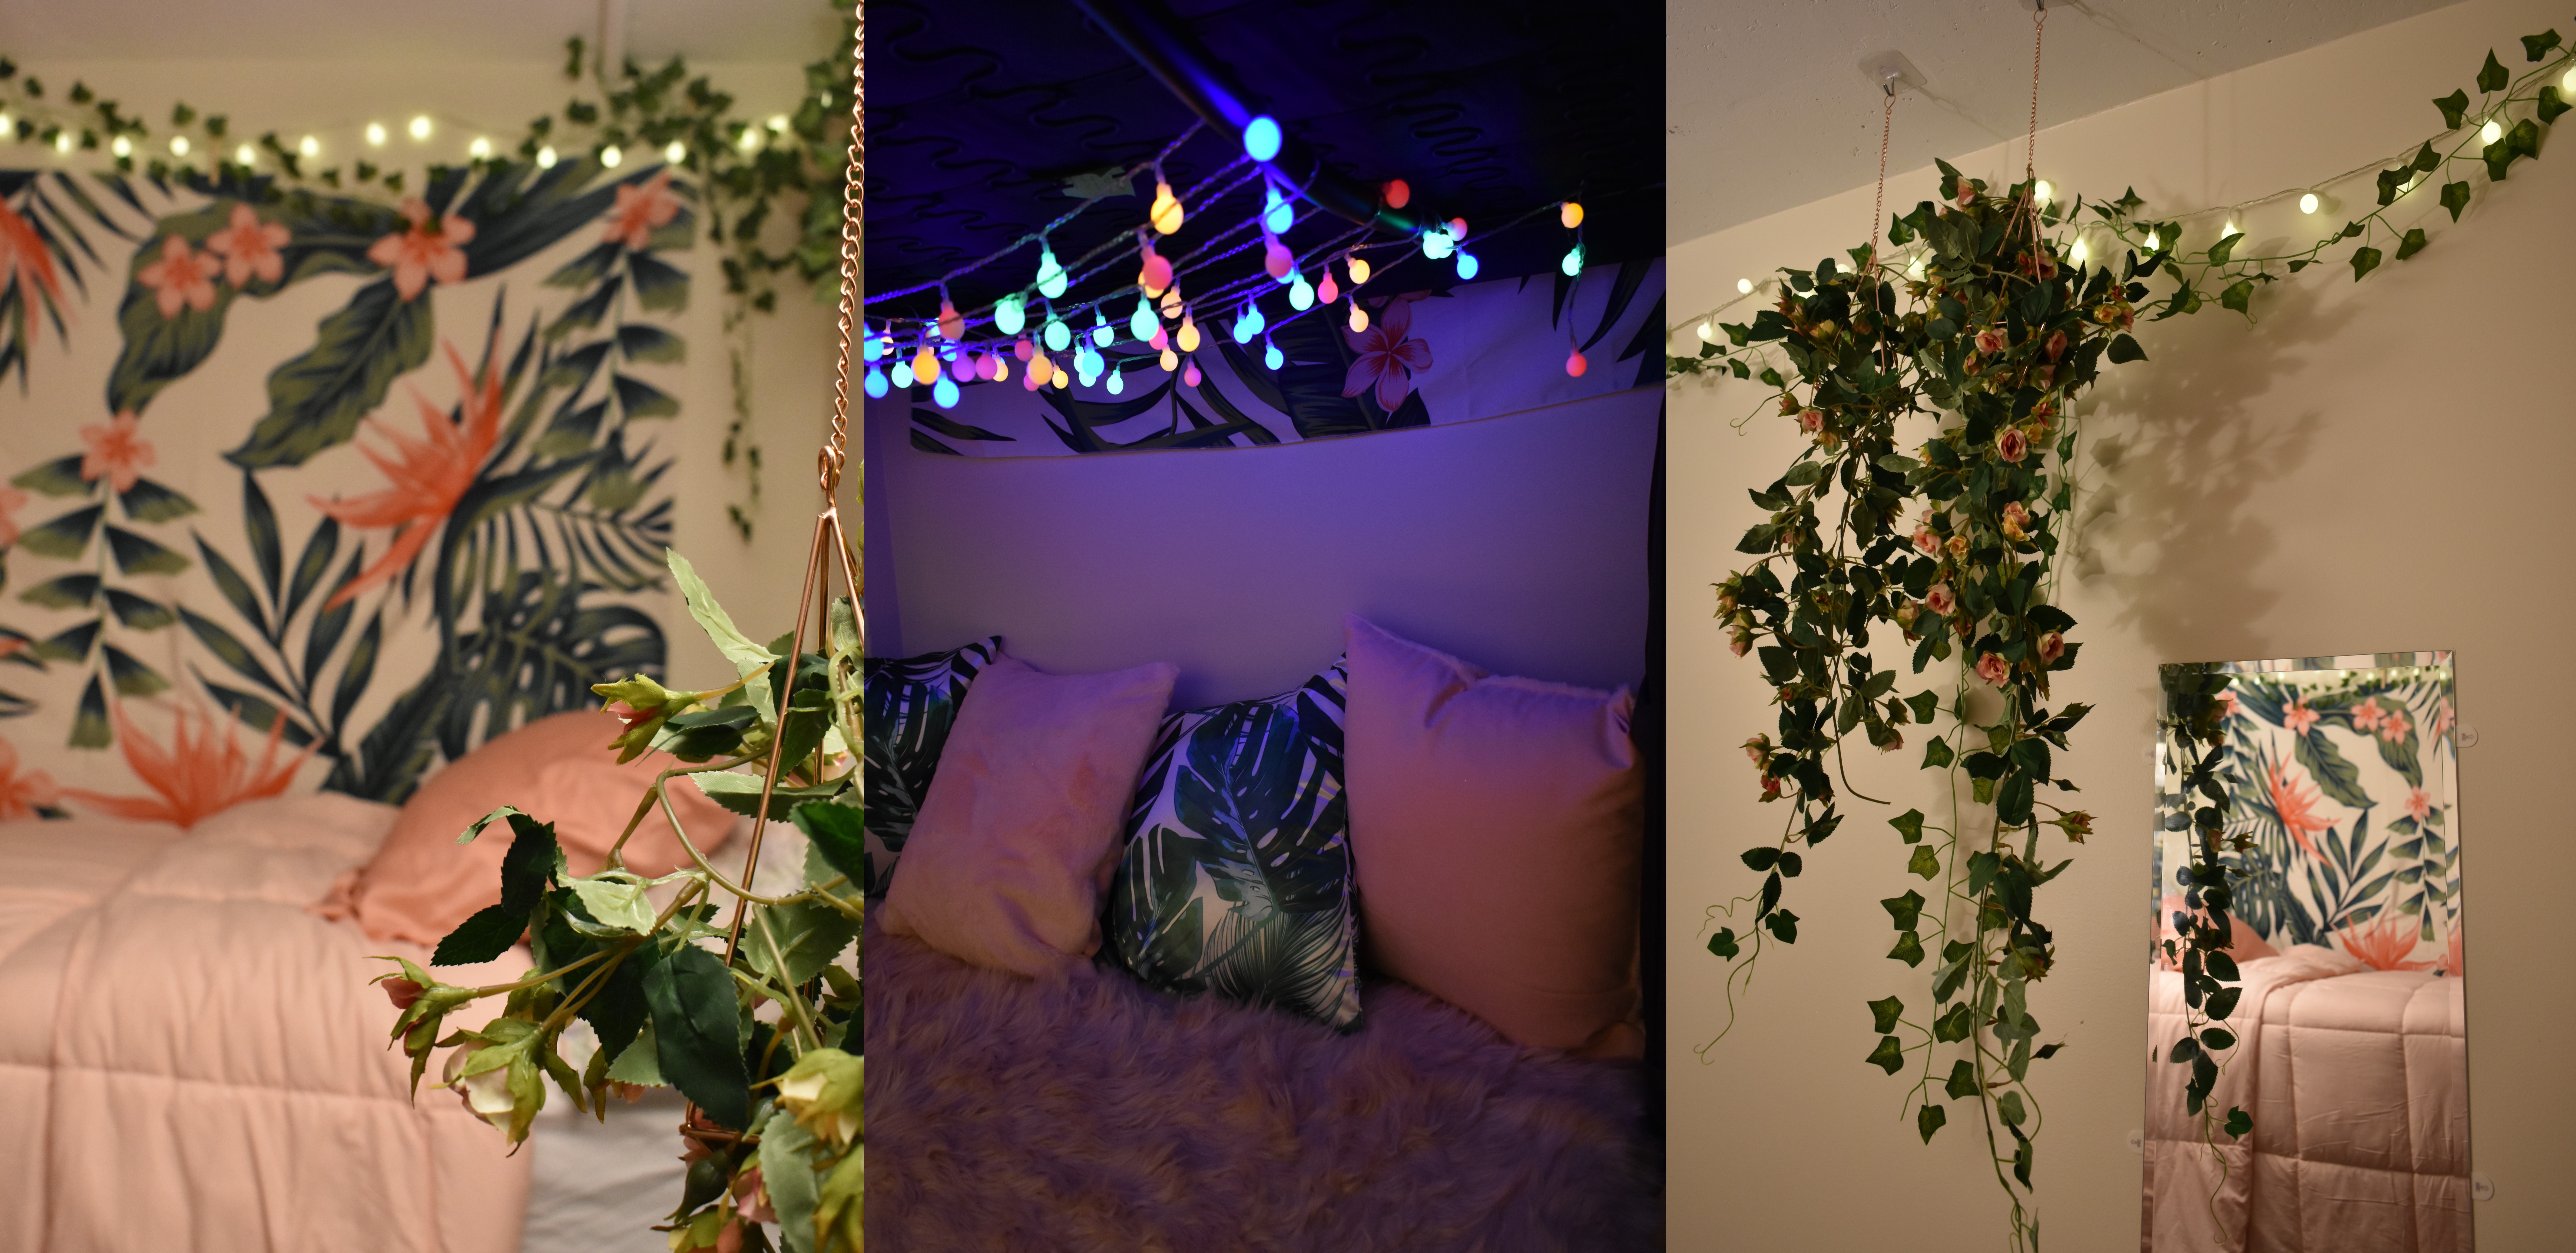 this is my room:). The left image is a picture of my bed and tapestry, the middle is a picture of the setup under my bed, and the last image is a picture of the fake plants I hung up 